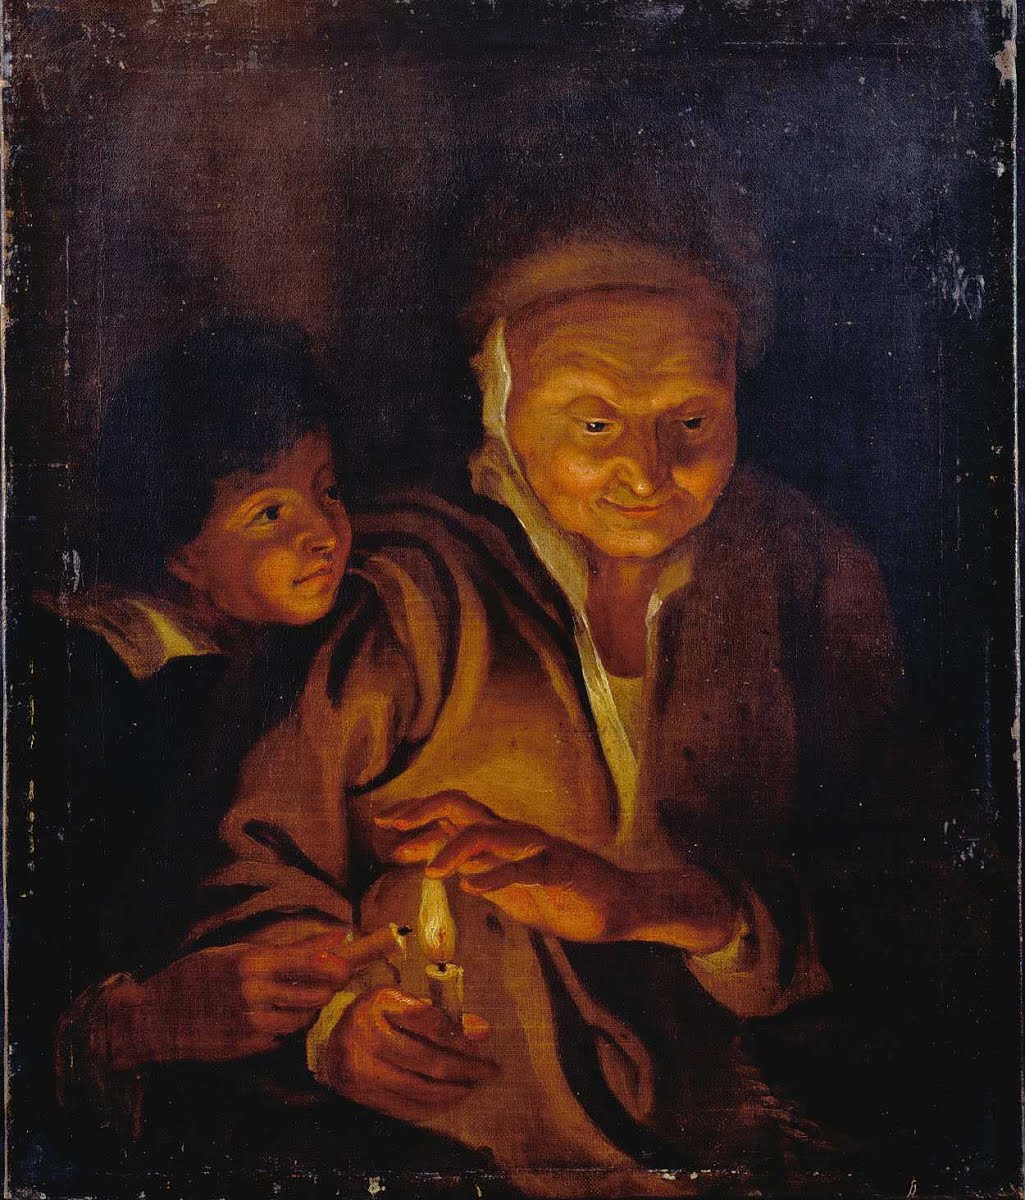 A Boy lighting a Candle from one held by an Old Woman - Rubens, Sir Peter  Paul — Google Arts & Culture